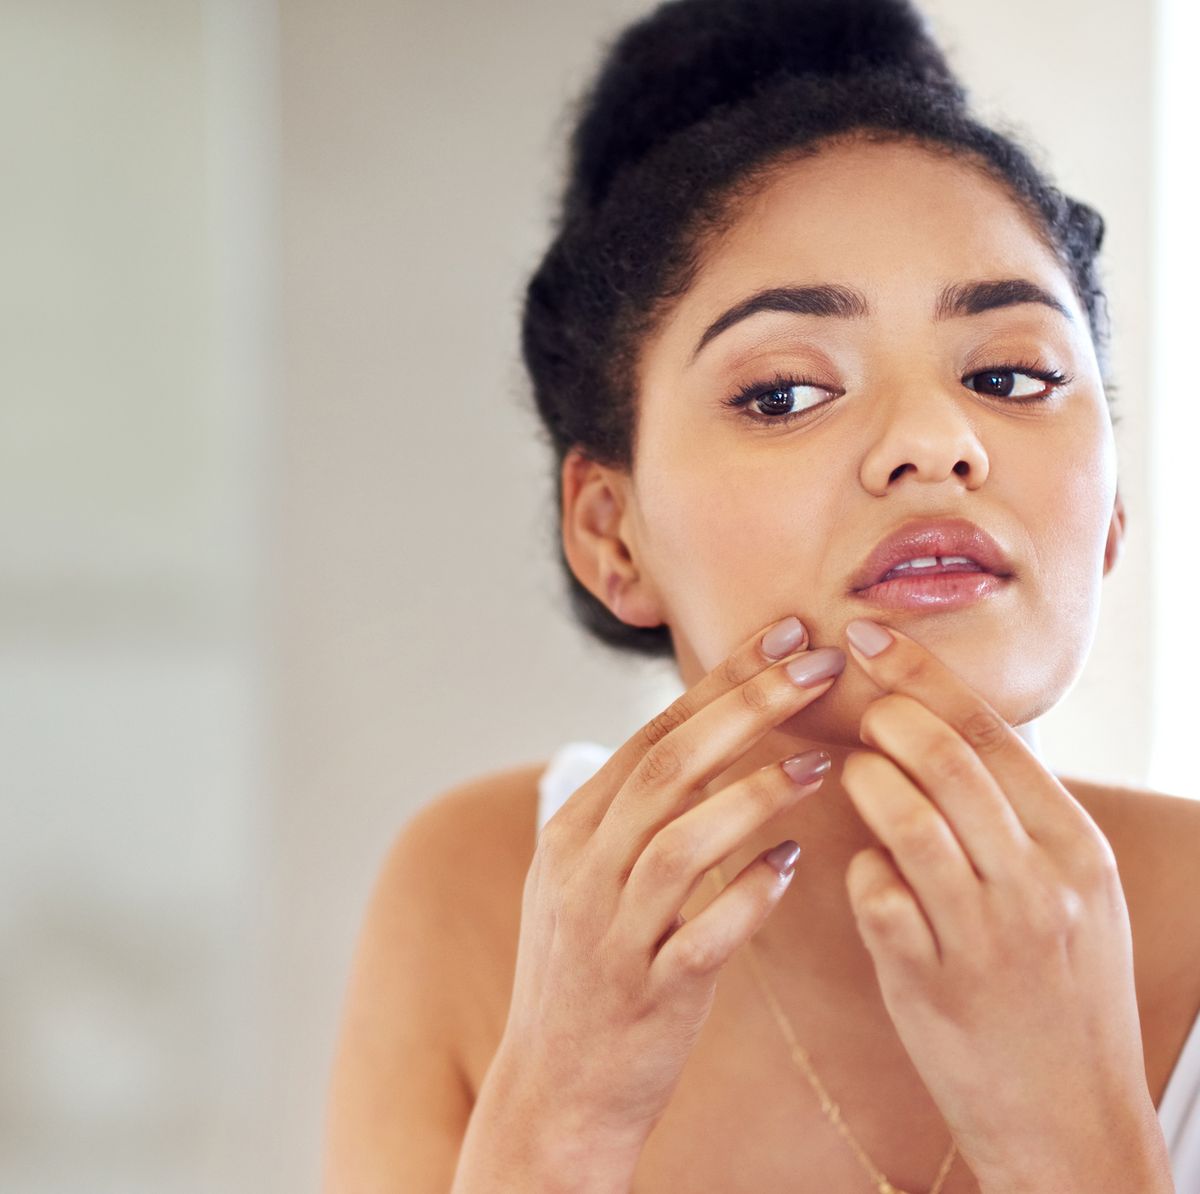 5 Different Types of Skin Blemishes on The Face And Its Treatments